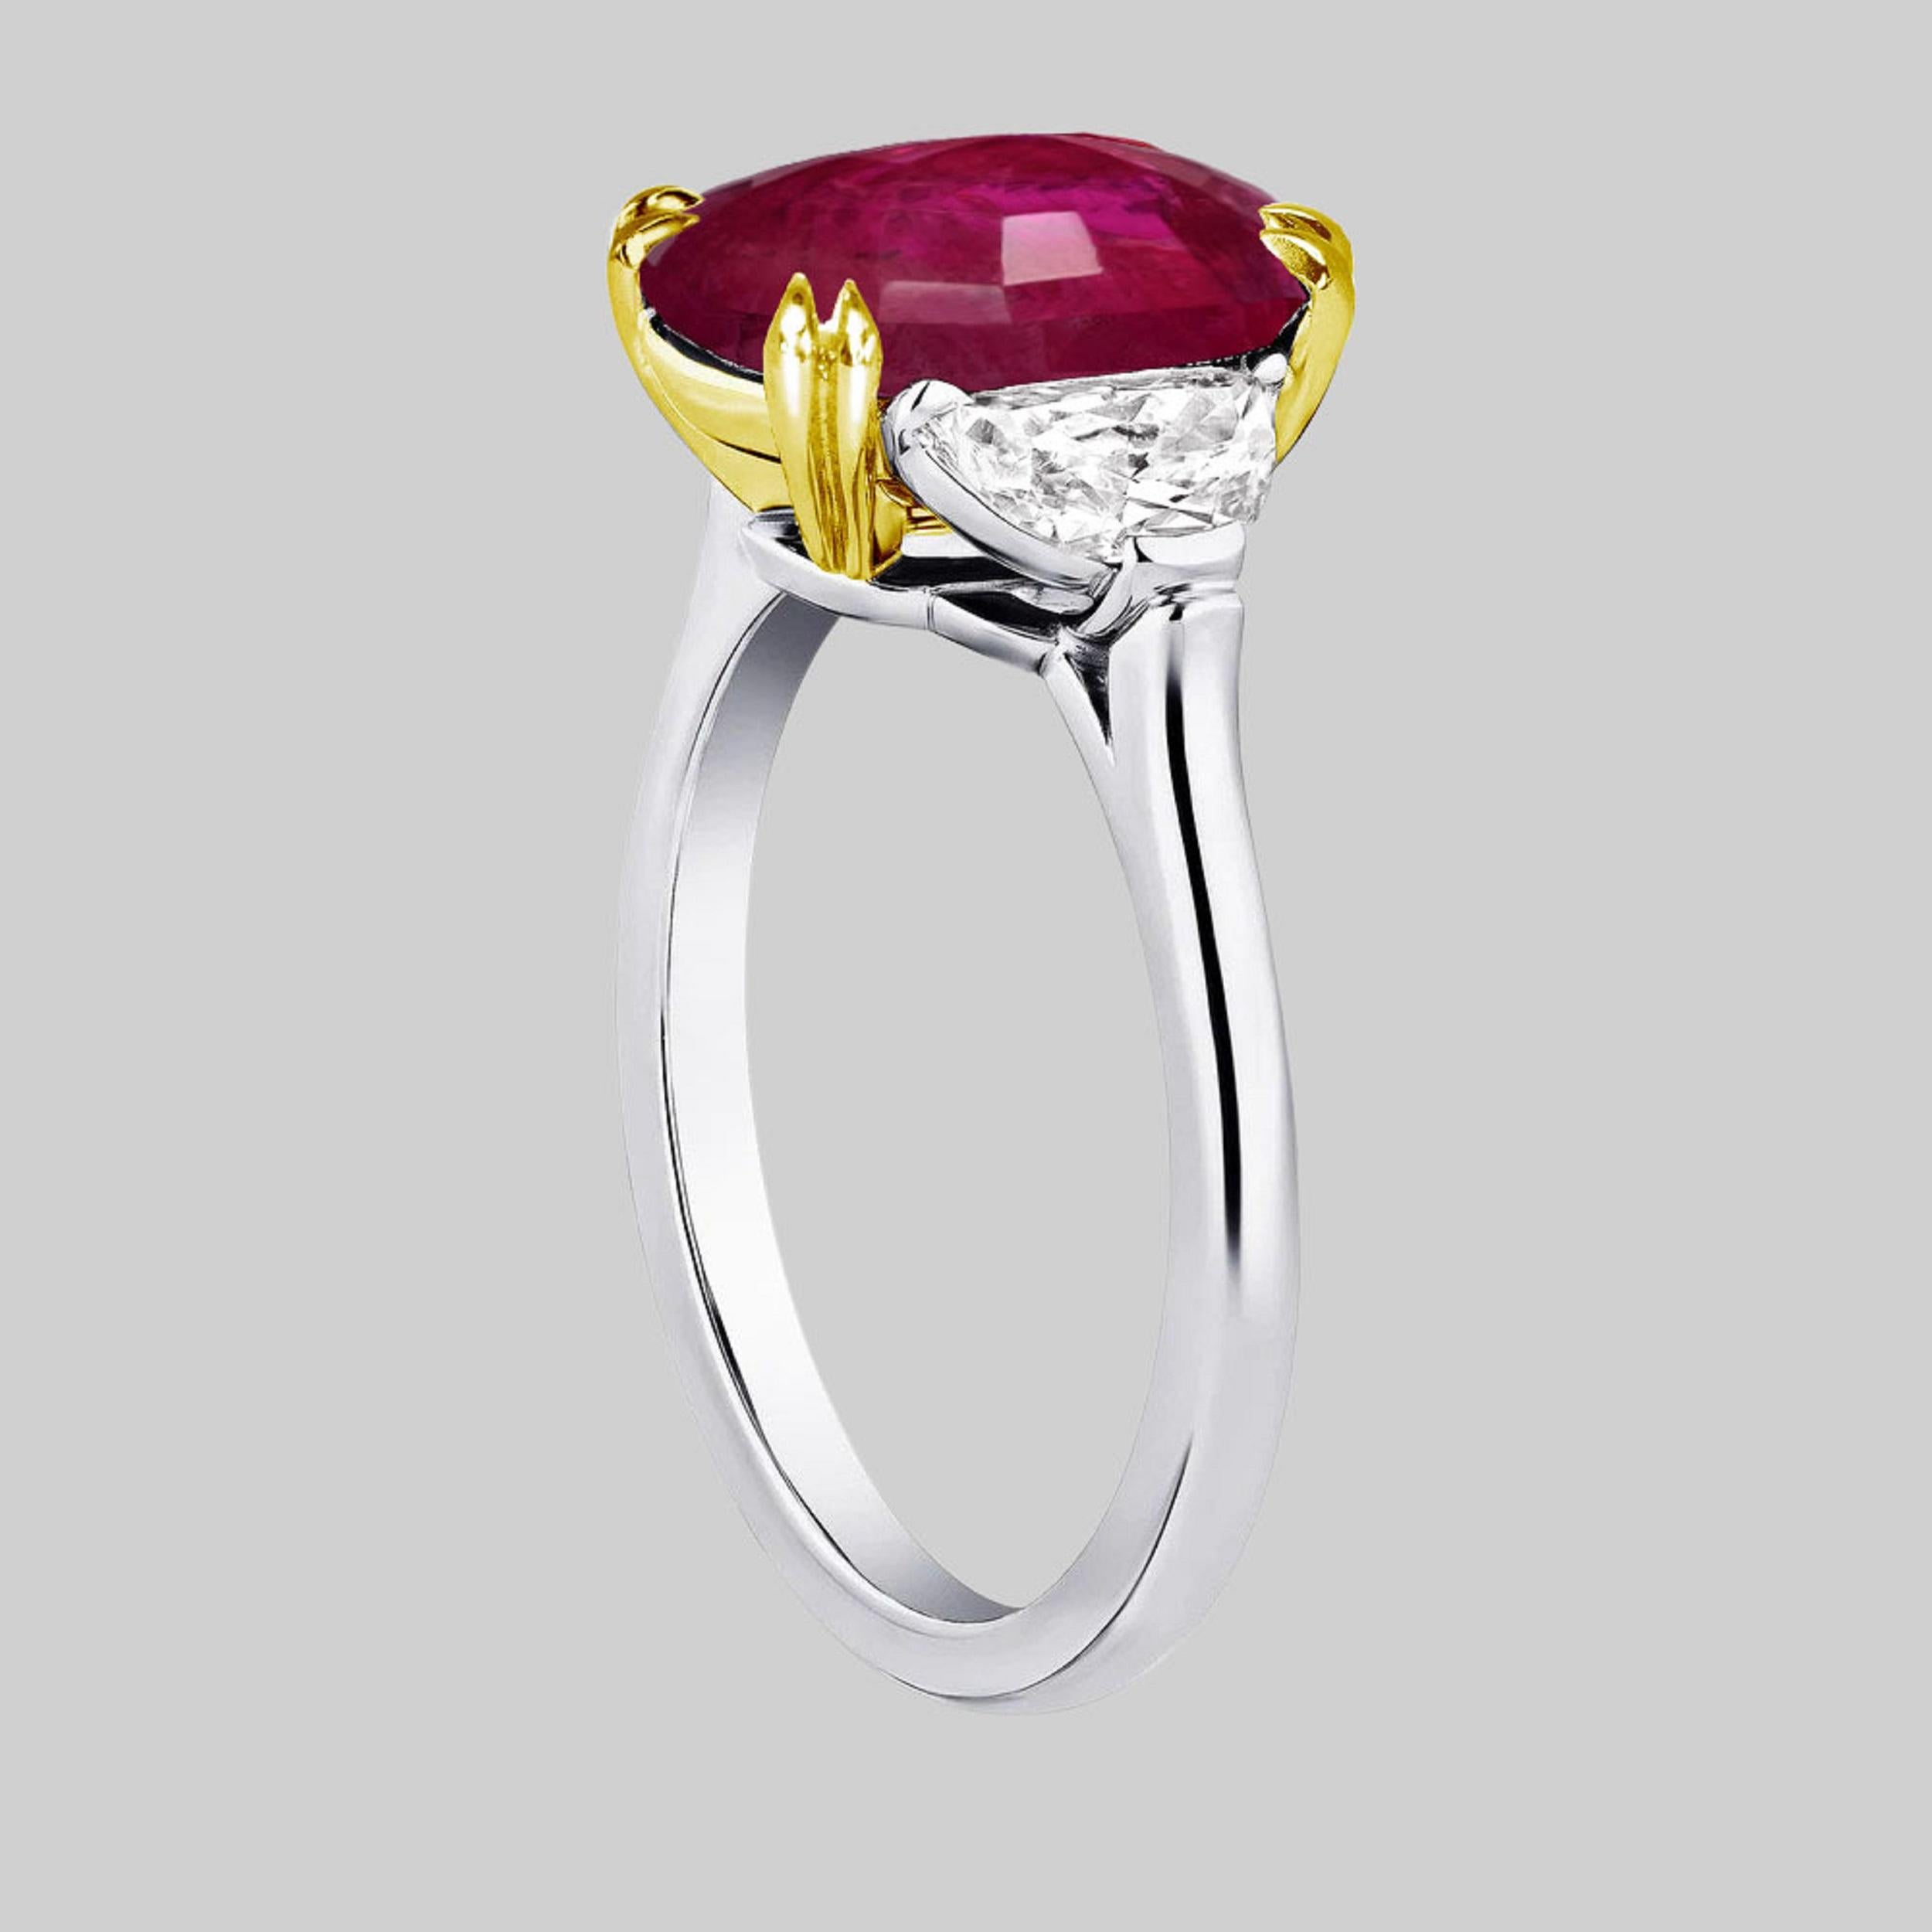 timeless allure of this Natural Ruby, sourced from the illustrious mines of Mogok in Burma (Myanmar).

Weighing in at a substantial 3.00 carats and fashioned into an elegant oval shape, this ruby exudes a captivating vibrancy. Its vivid to deep